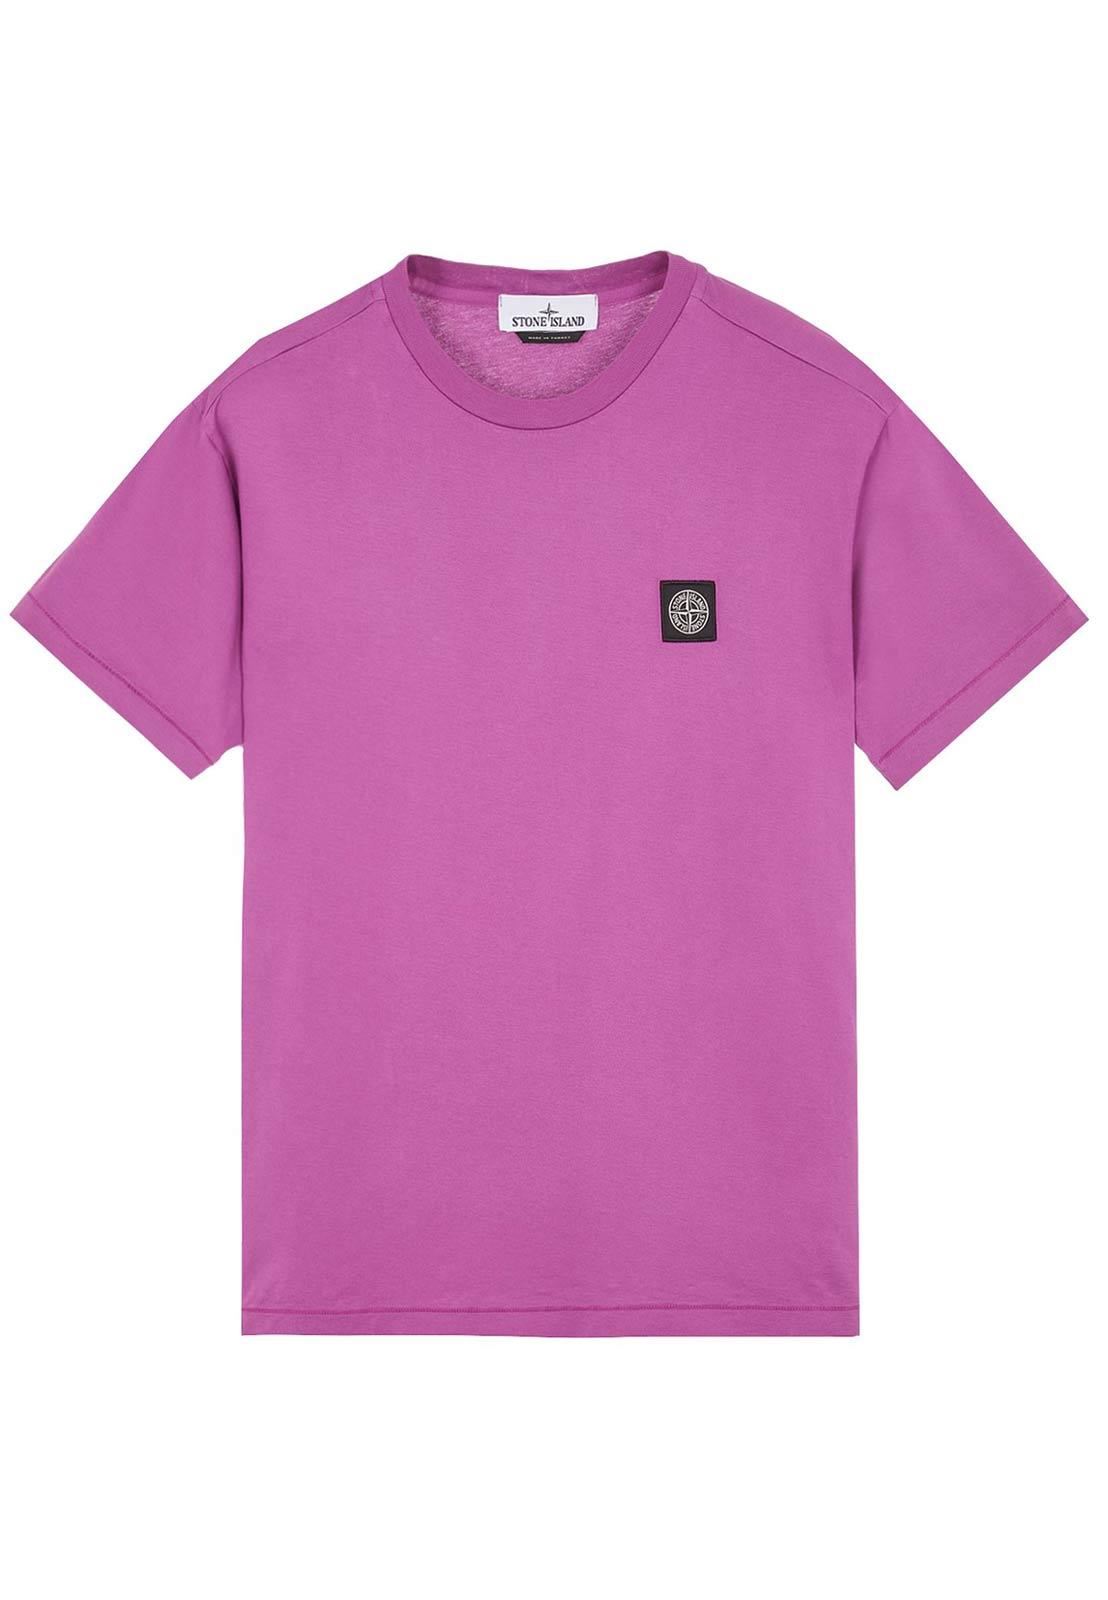 Stone Island T-shirt Magenta in Pink for Men | Lyst